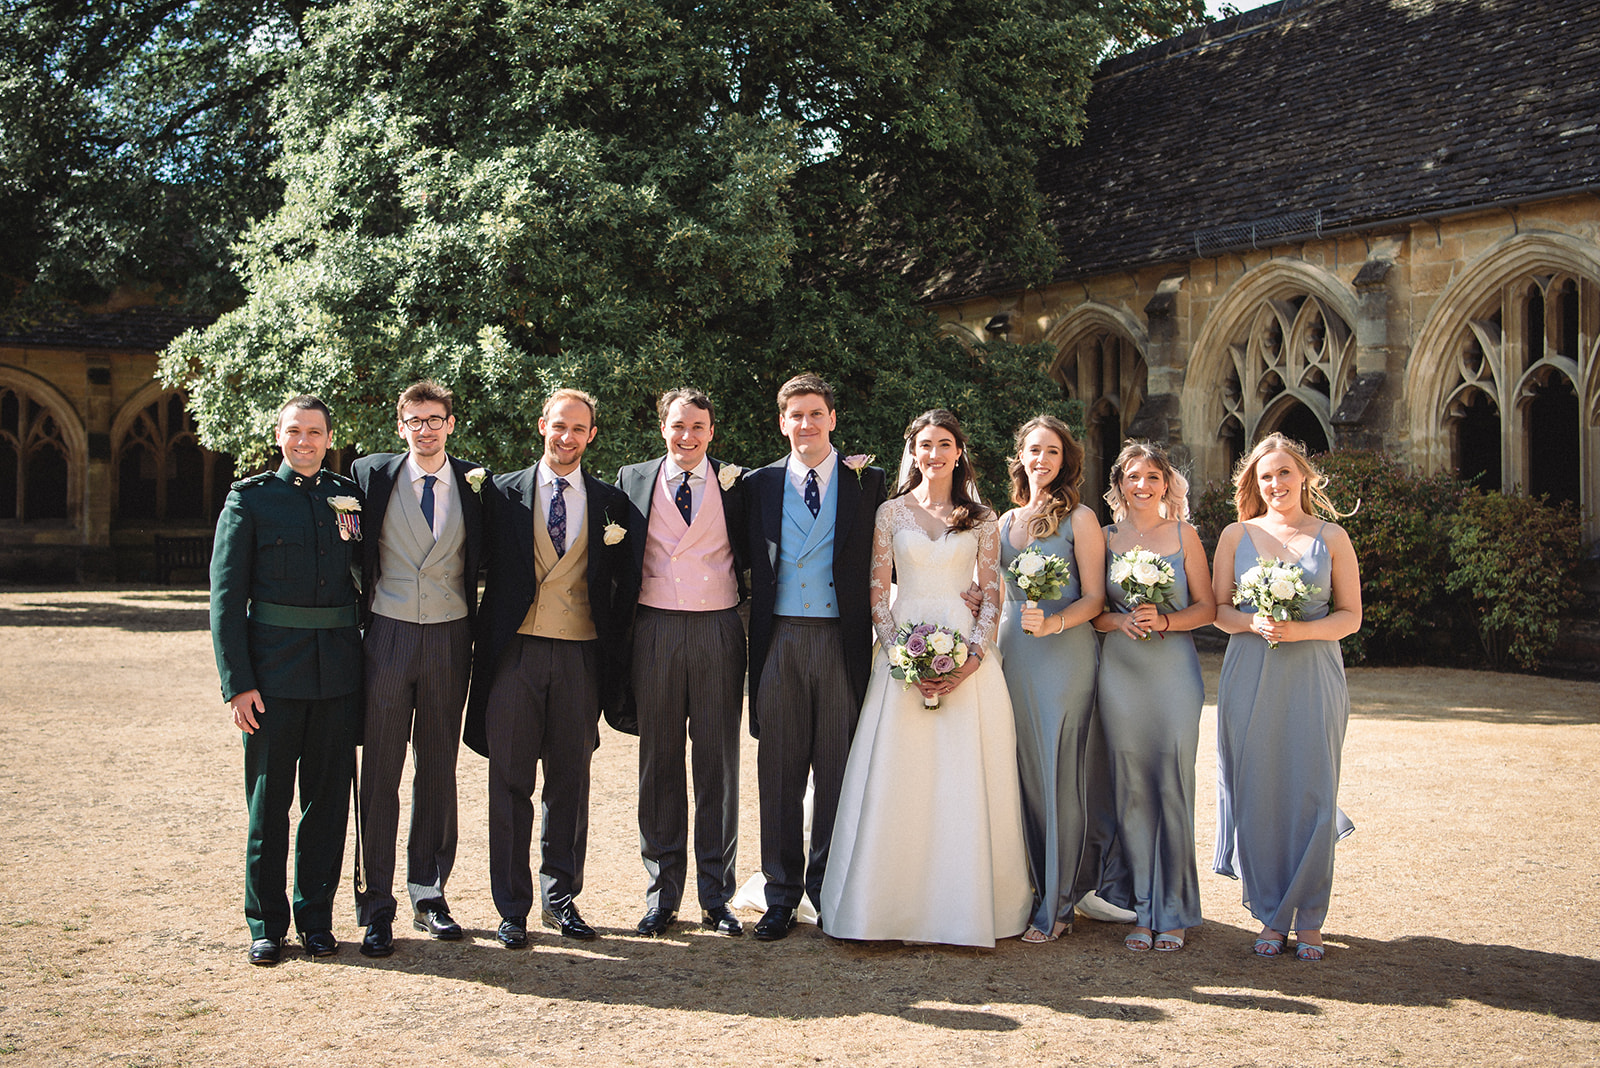 Beautiful portrait of Katherine and Damien with the groom's men and bride's maid outside the New College Chapel